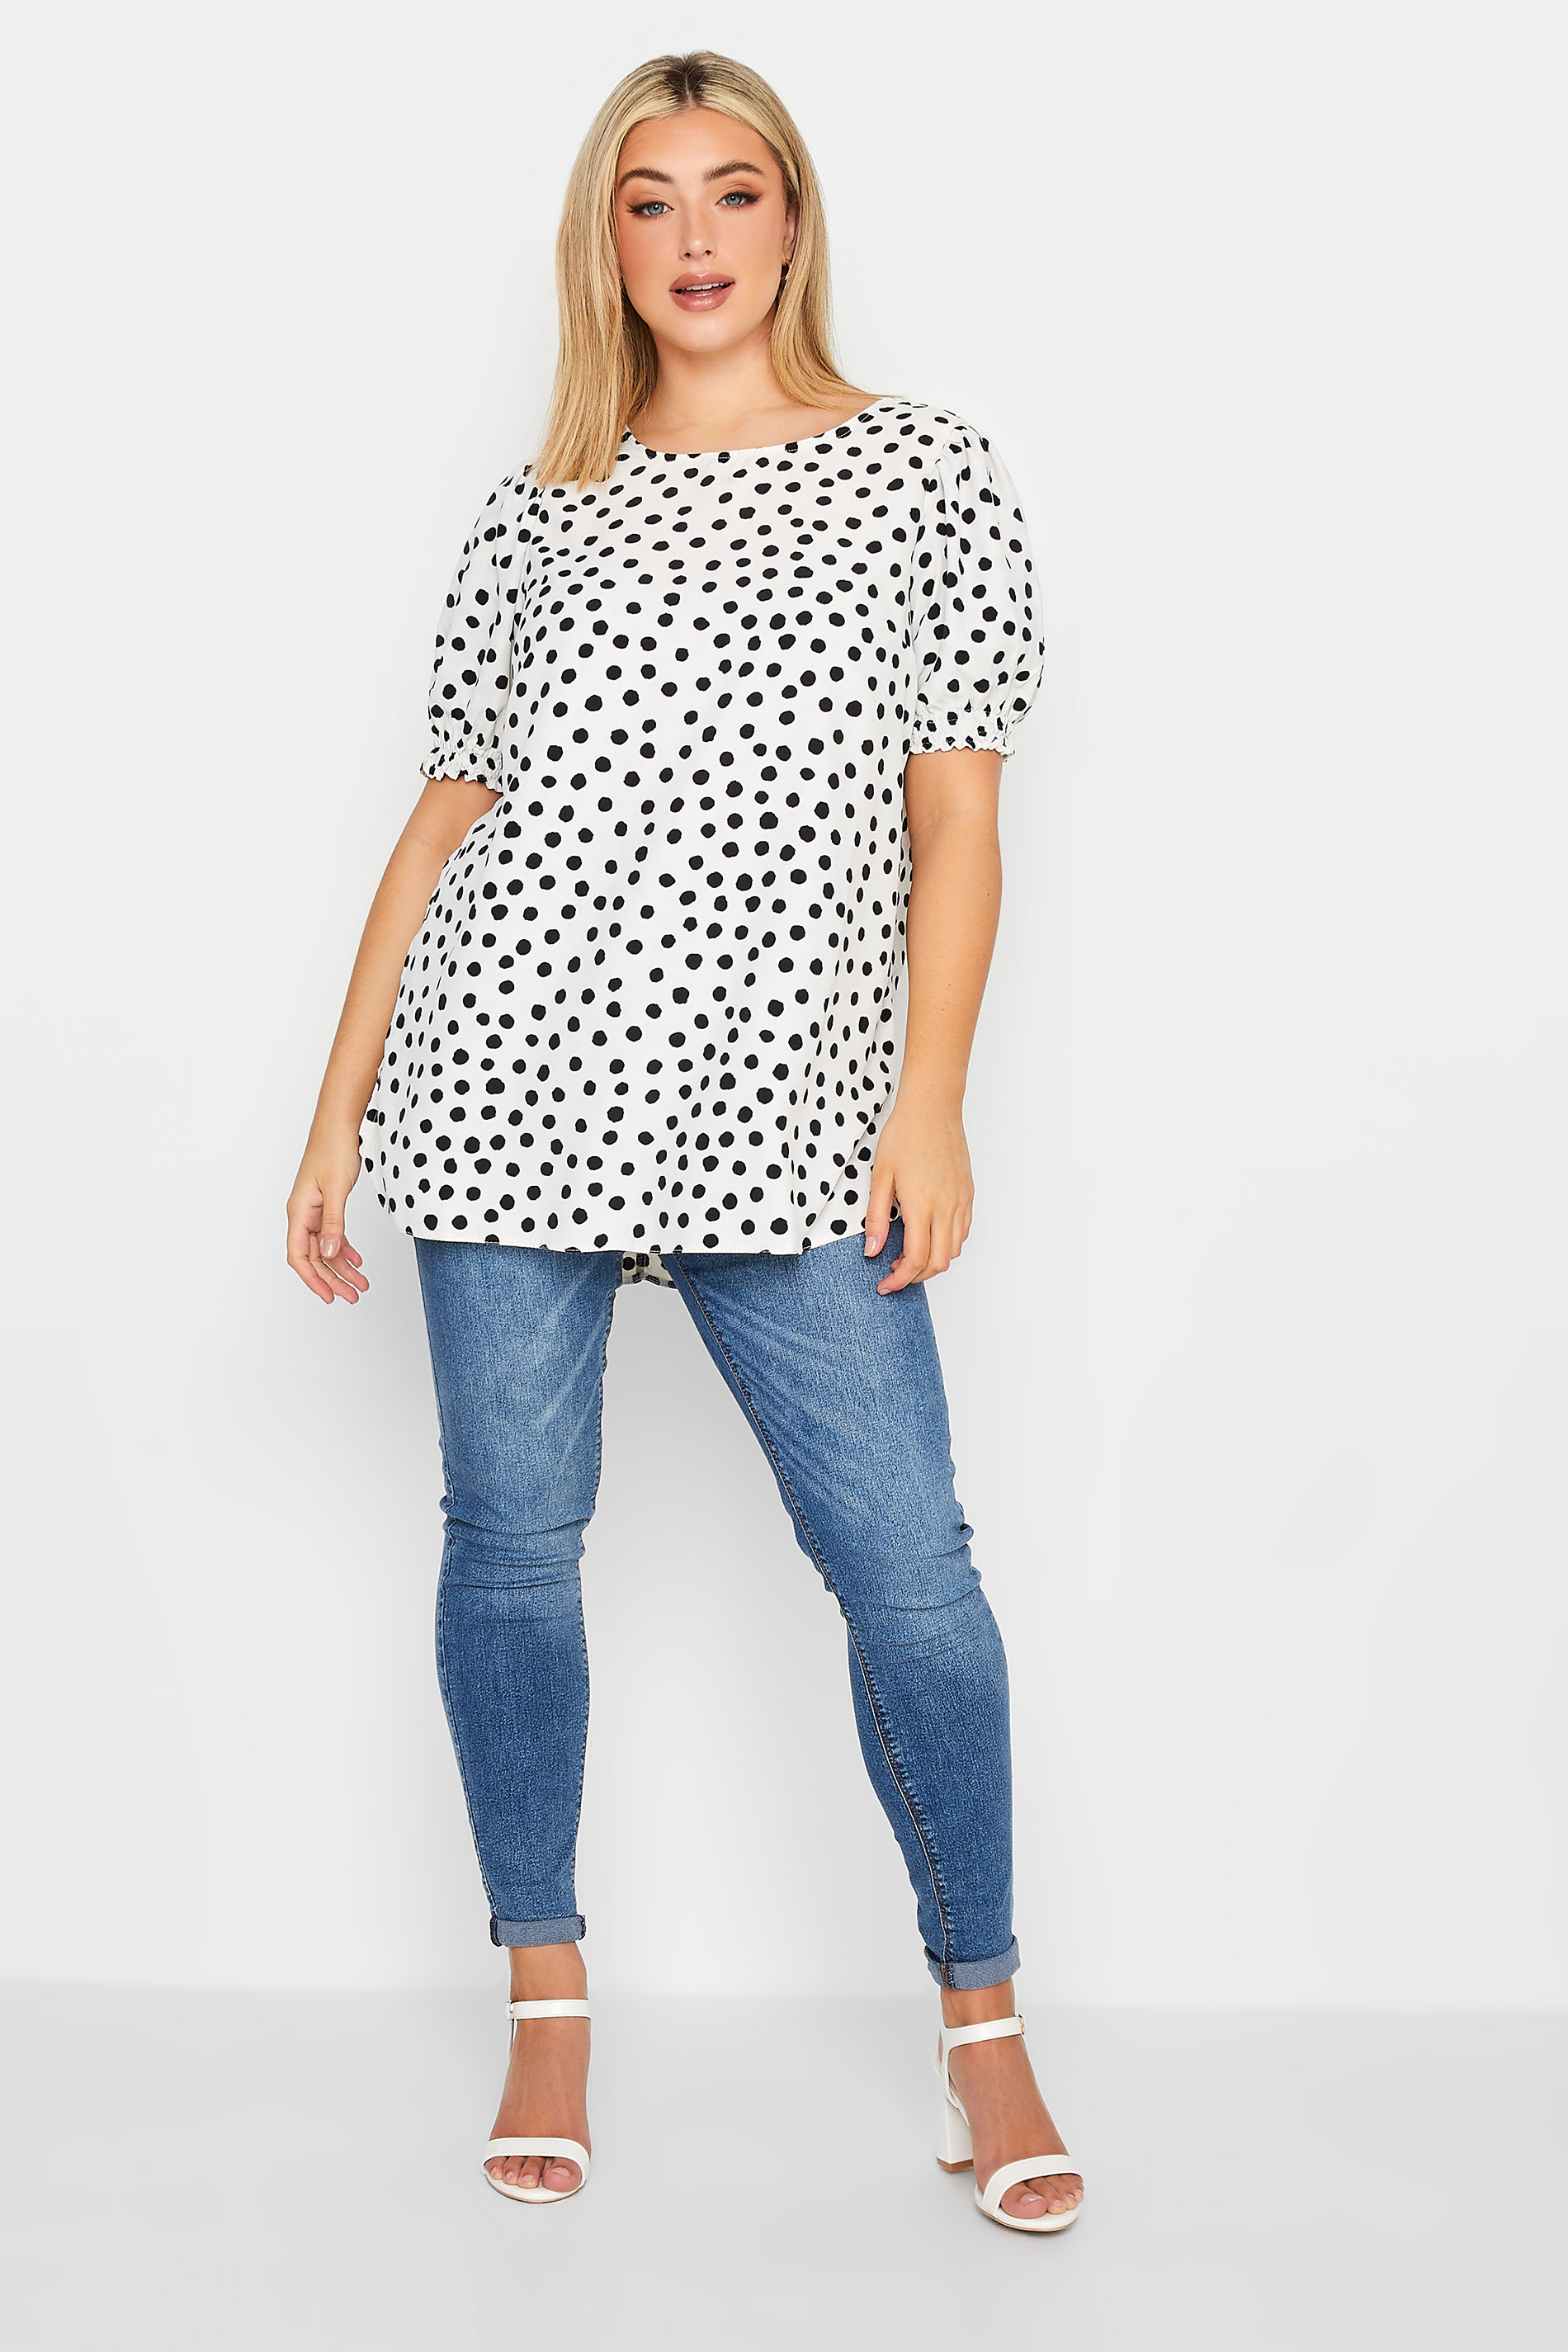 YOURS Curve Plus Size White Polka Dot Print Short Sleeve Blouse | Yours Clothing  2